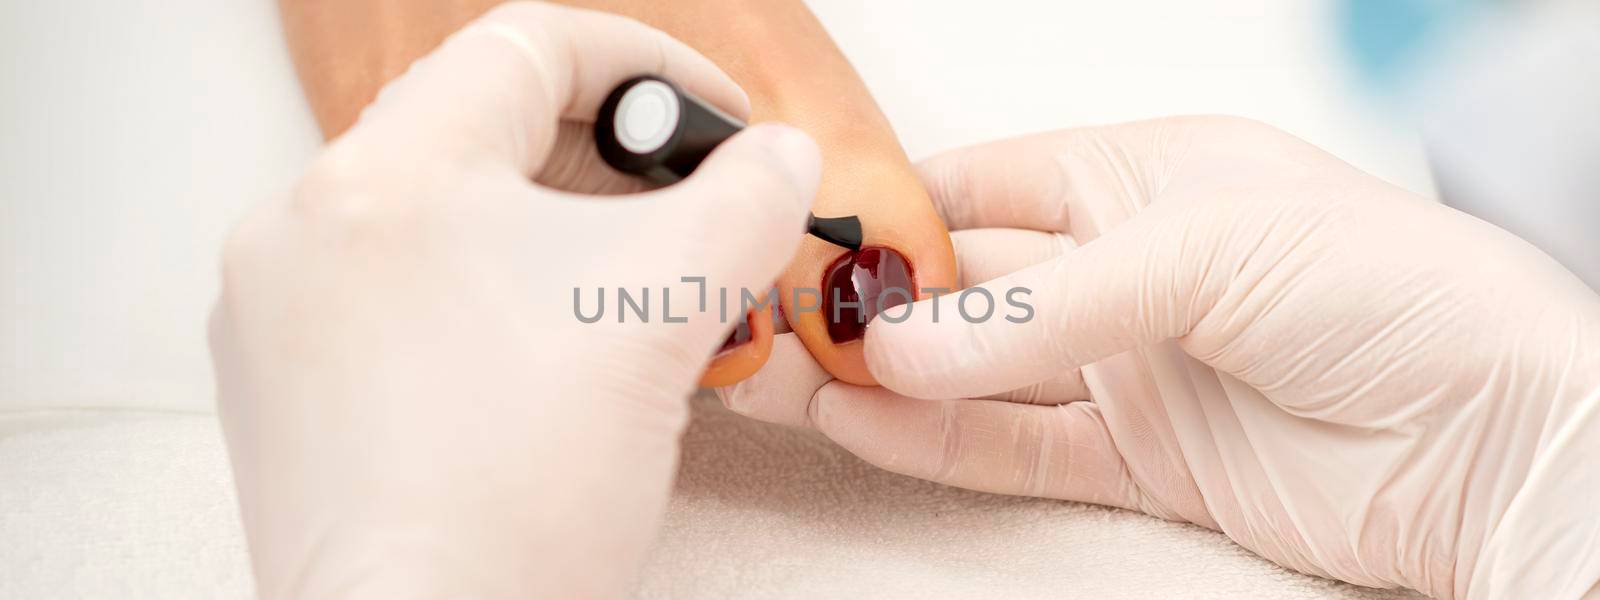 Closeup of hands in white gloves applying burgundy nail polish with a brush on woman's toes in a nail salon